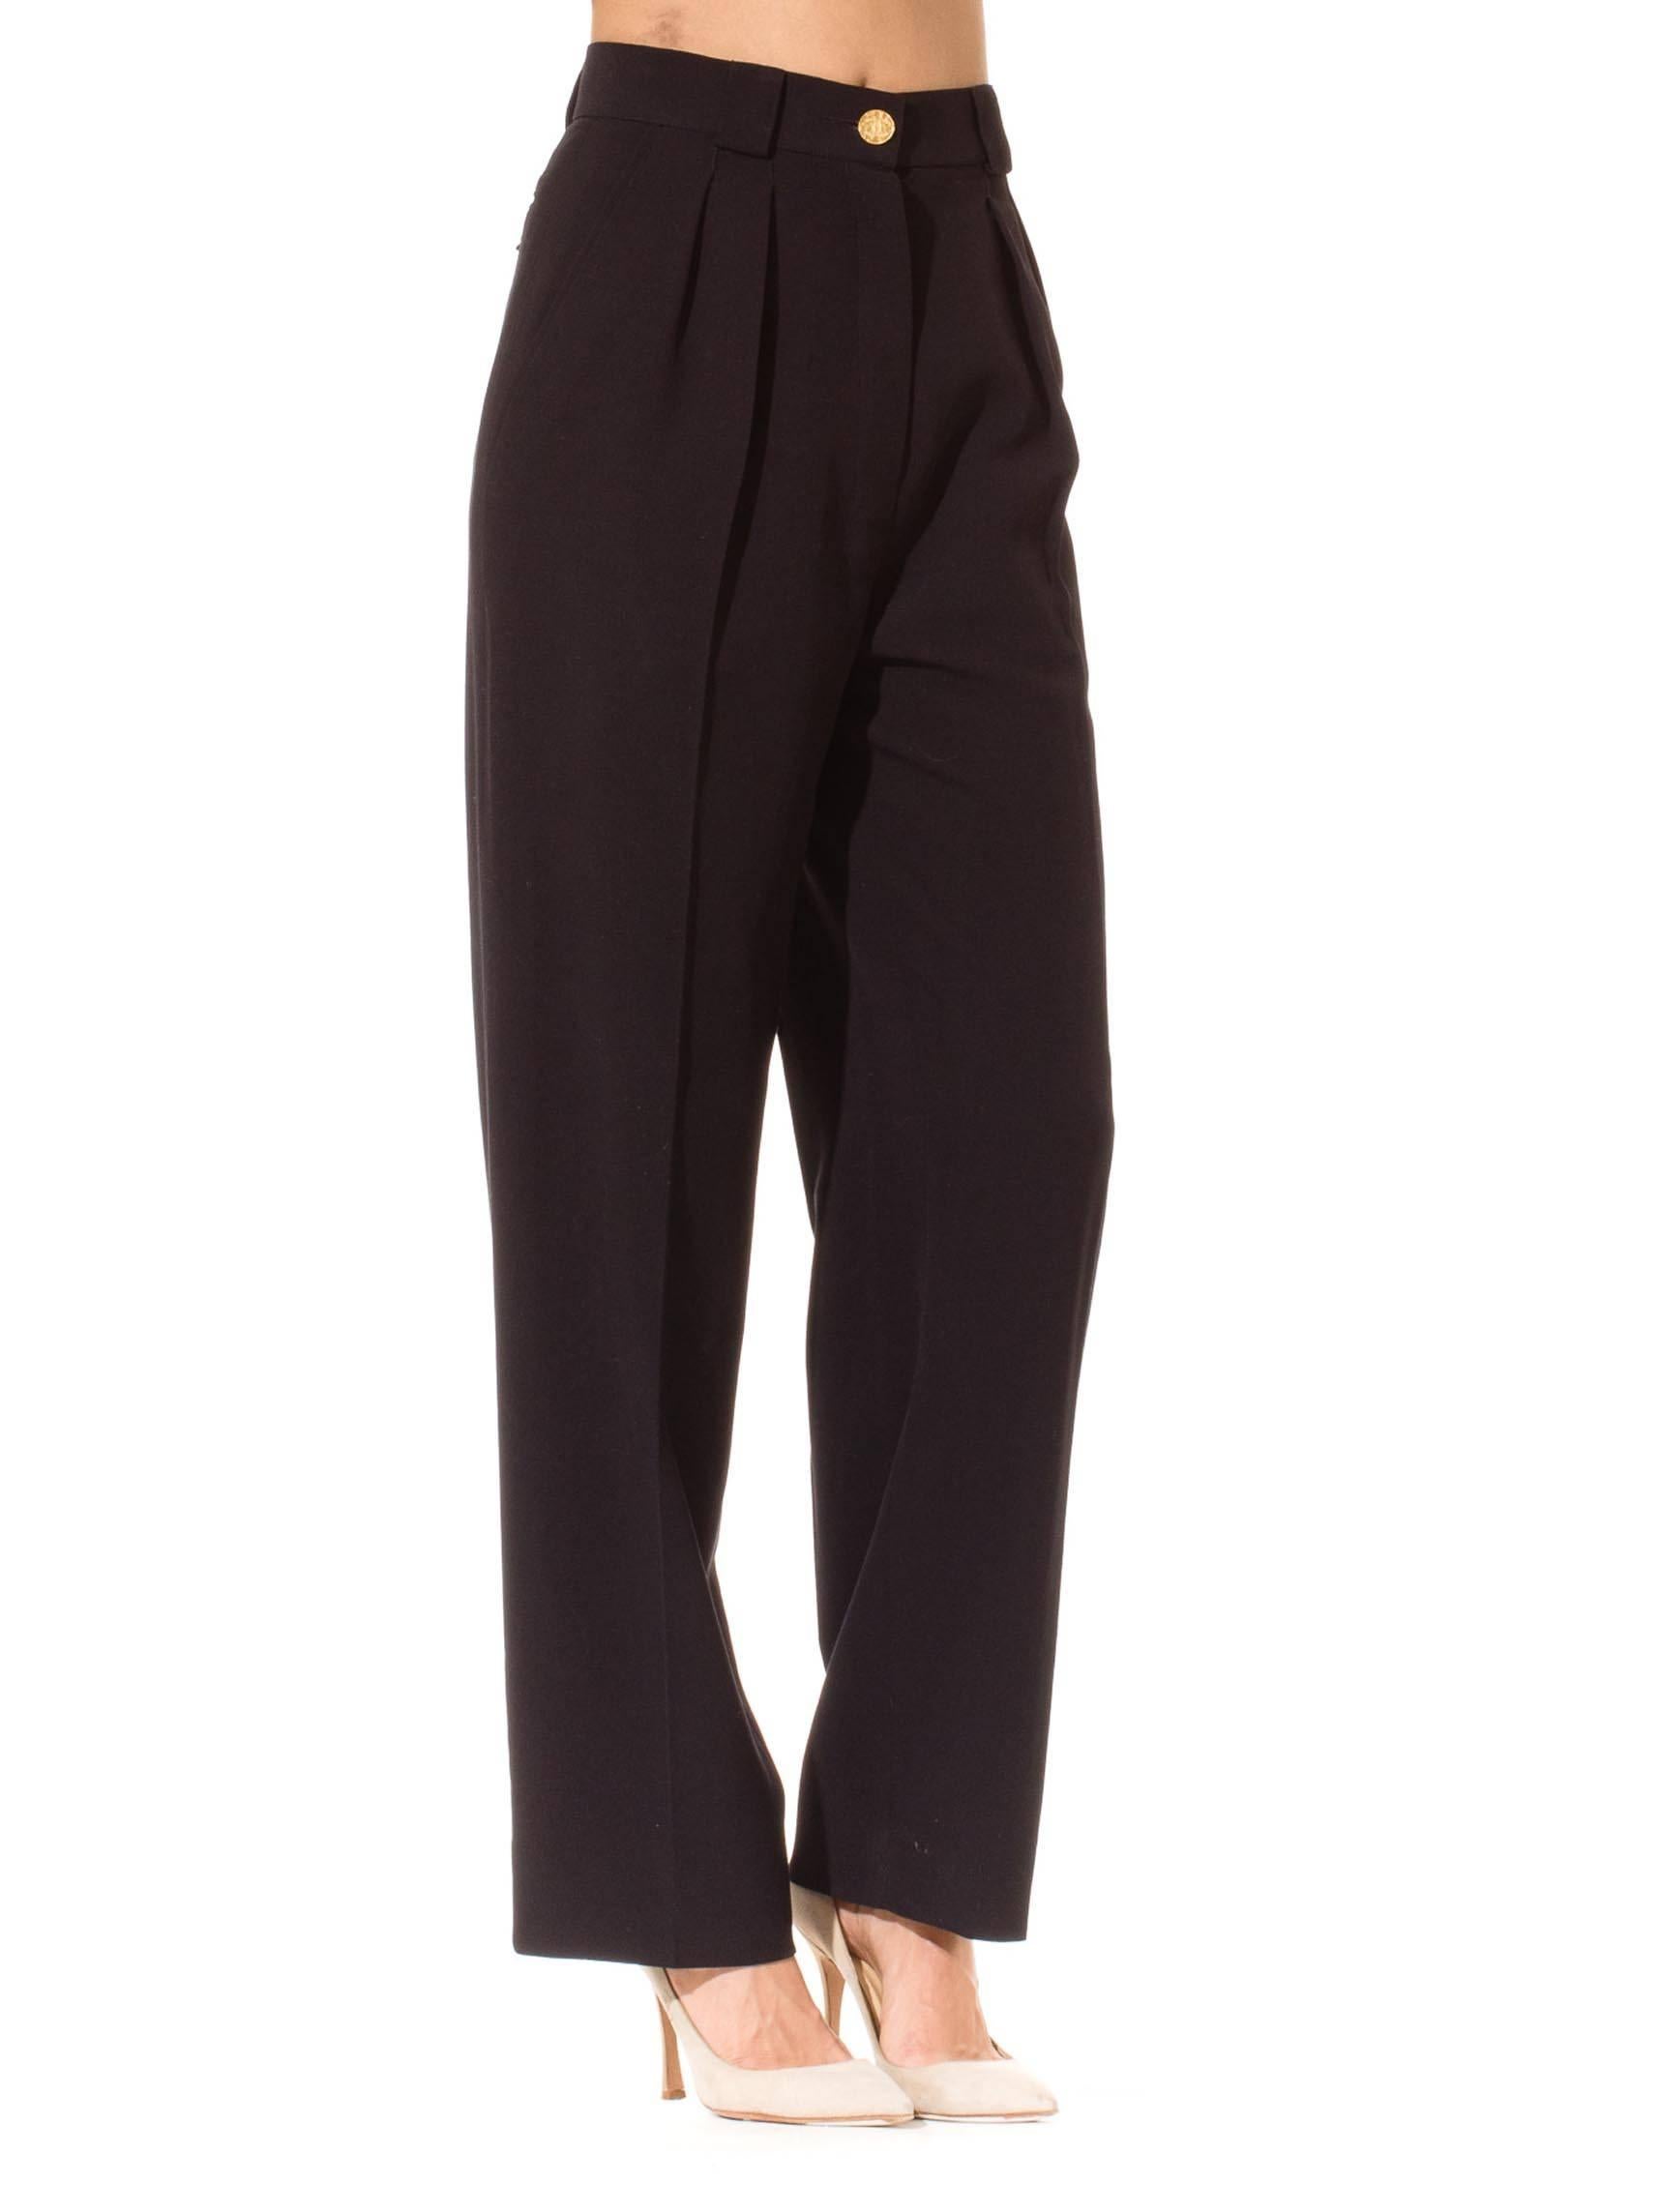 Black Classic Chanel Trousers